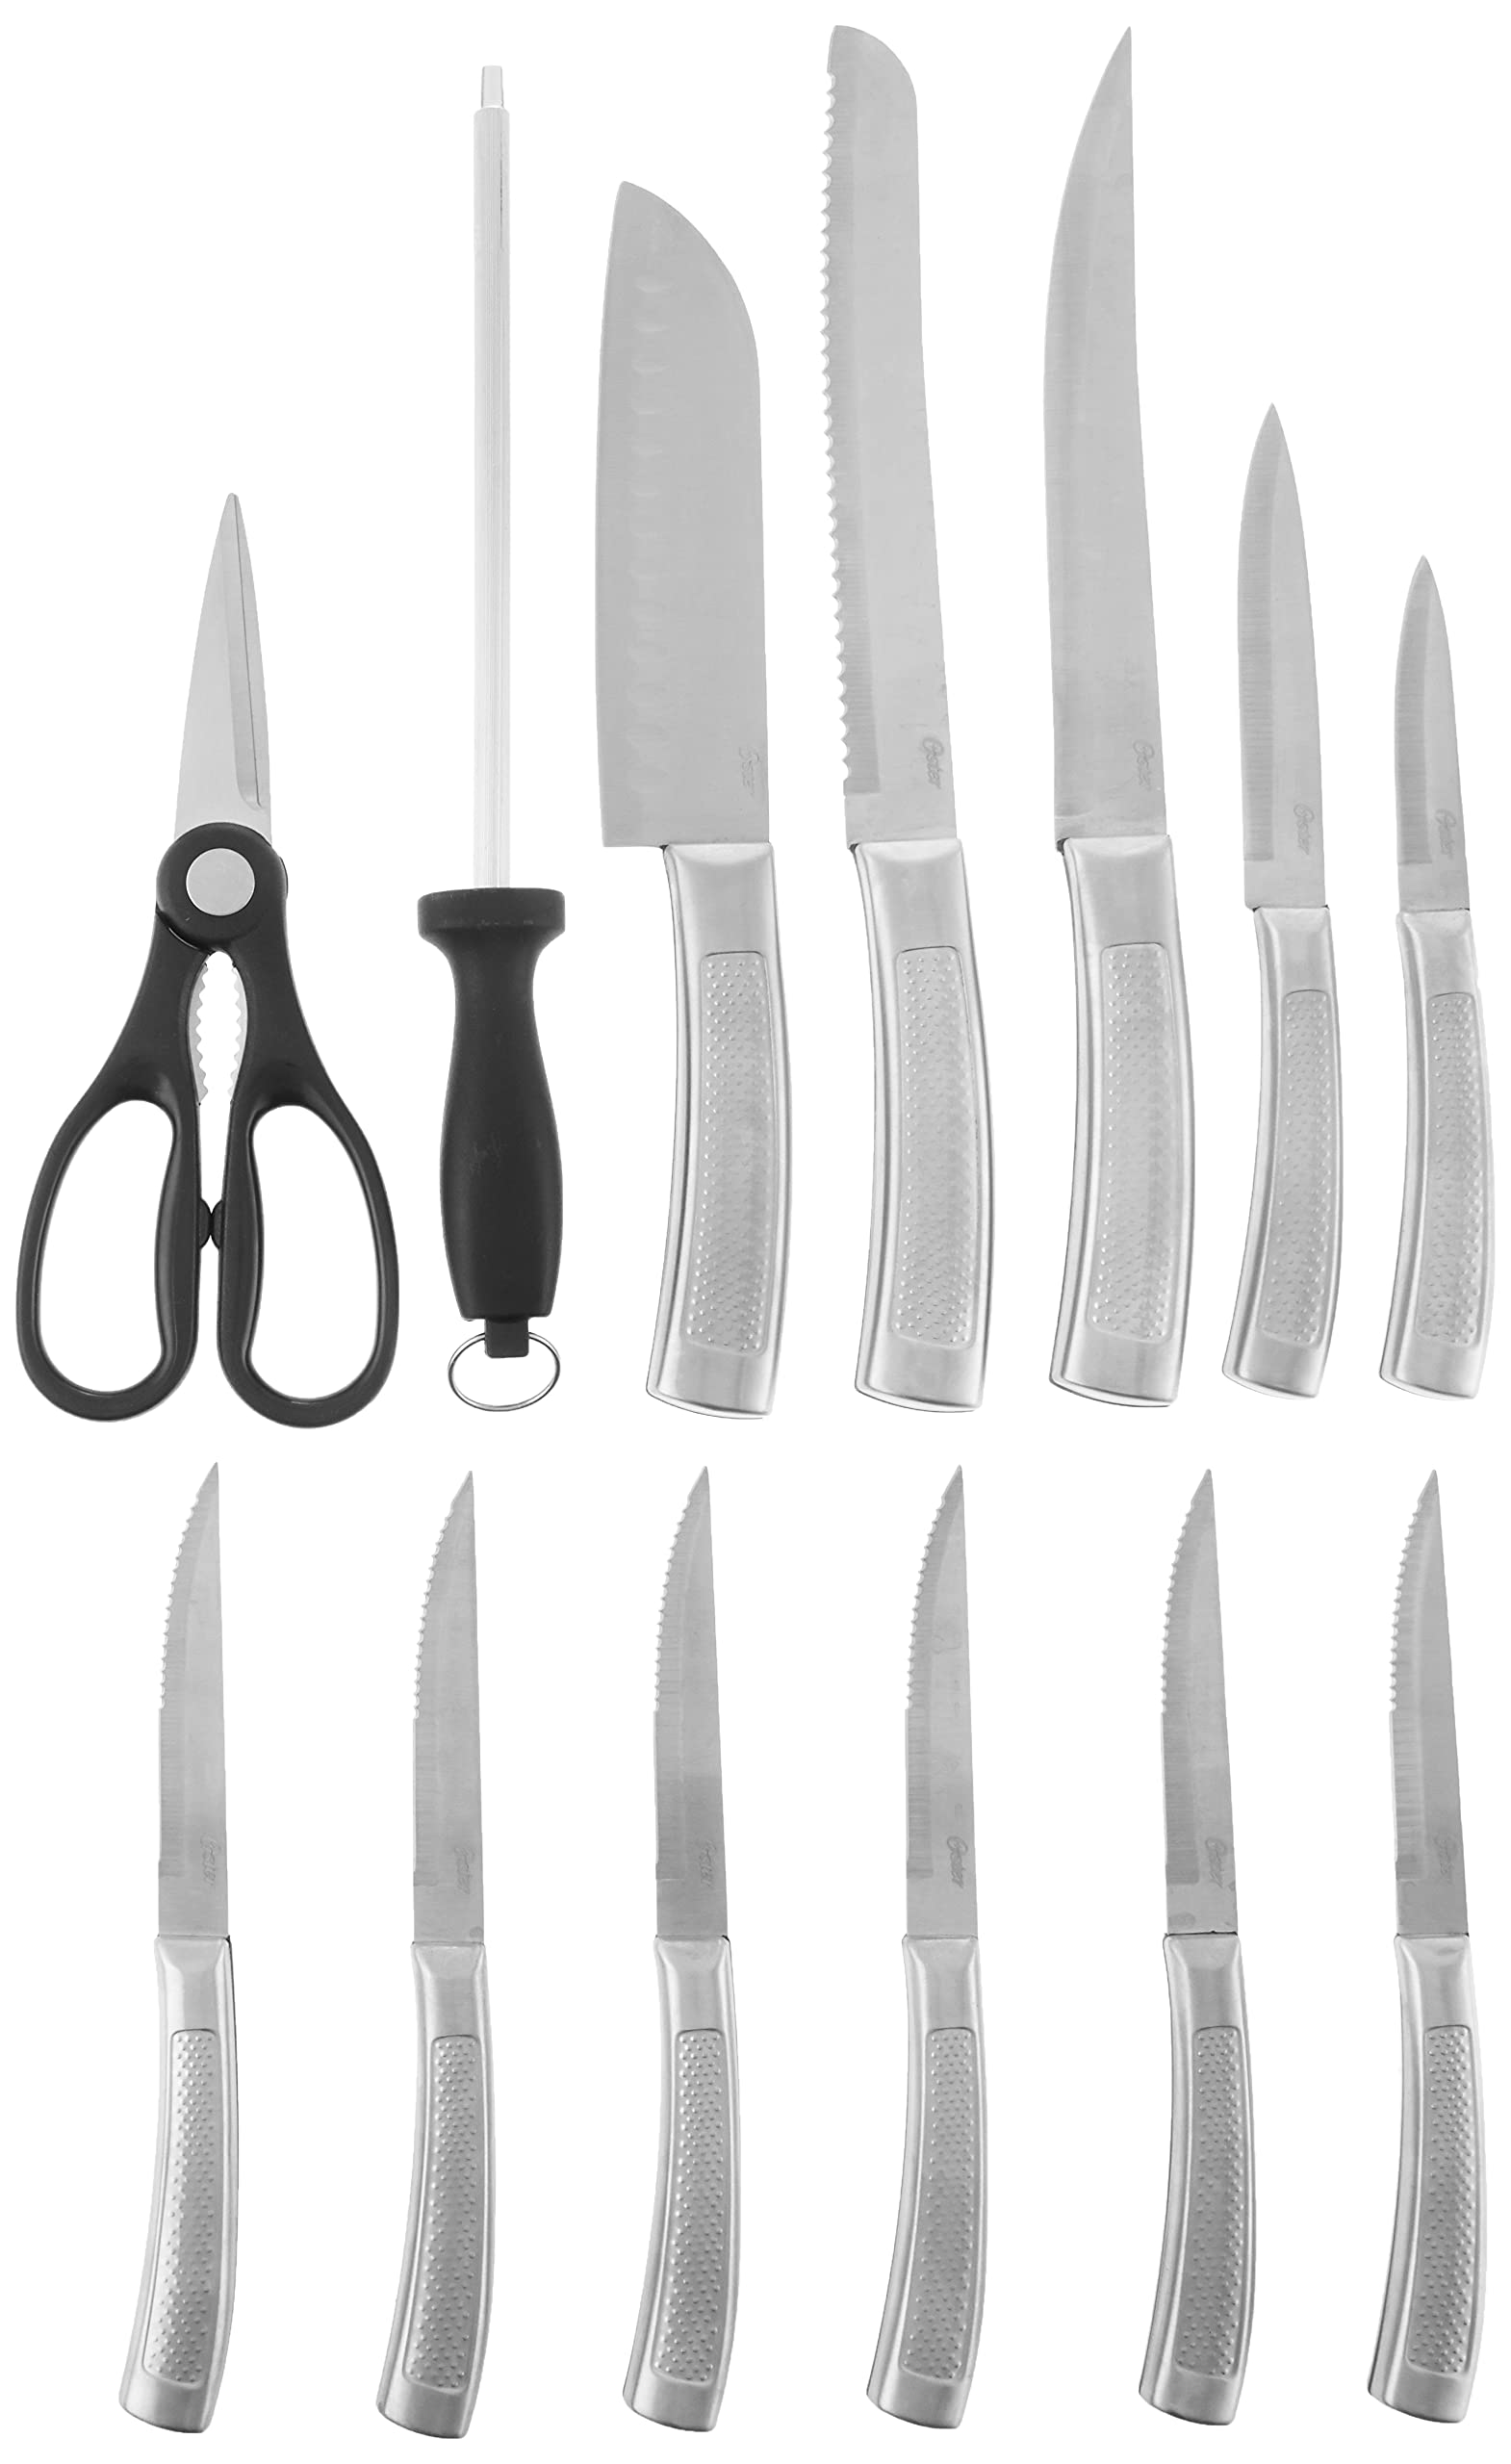 Oster Wellisford High-Carbon Stainless Steel Cutlery Set, 14-Piece, Black/Silver